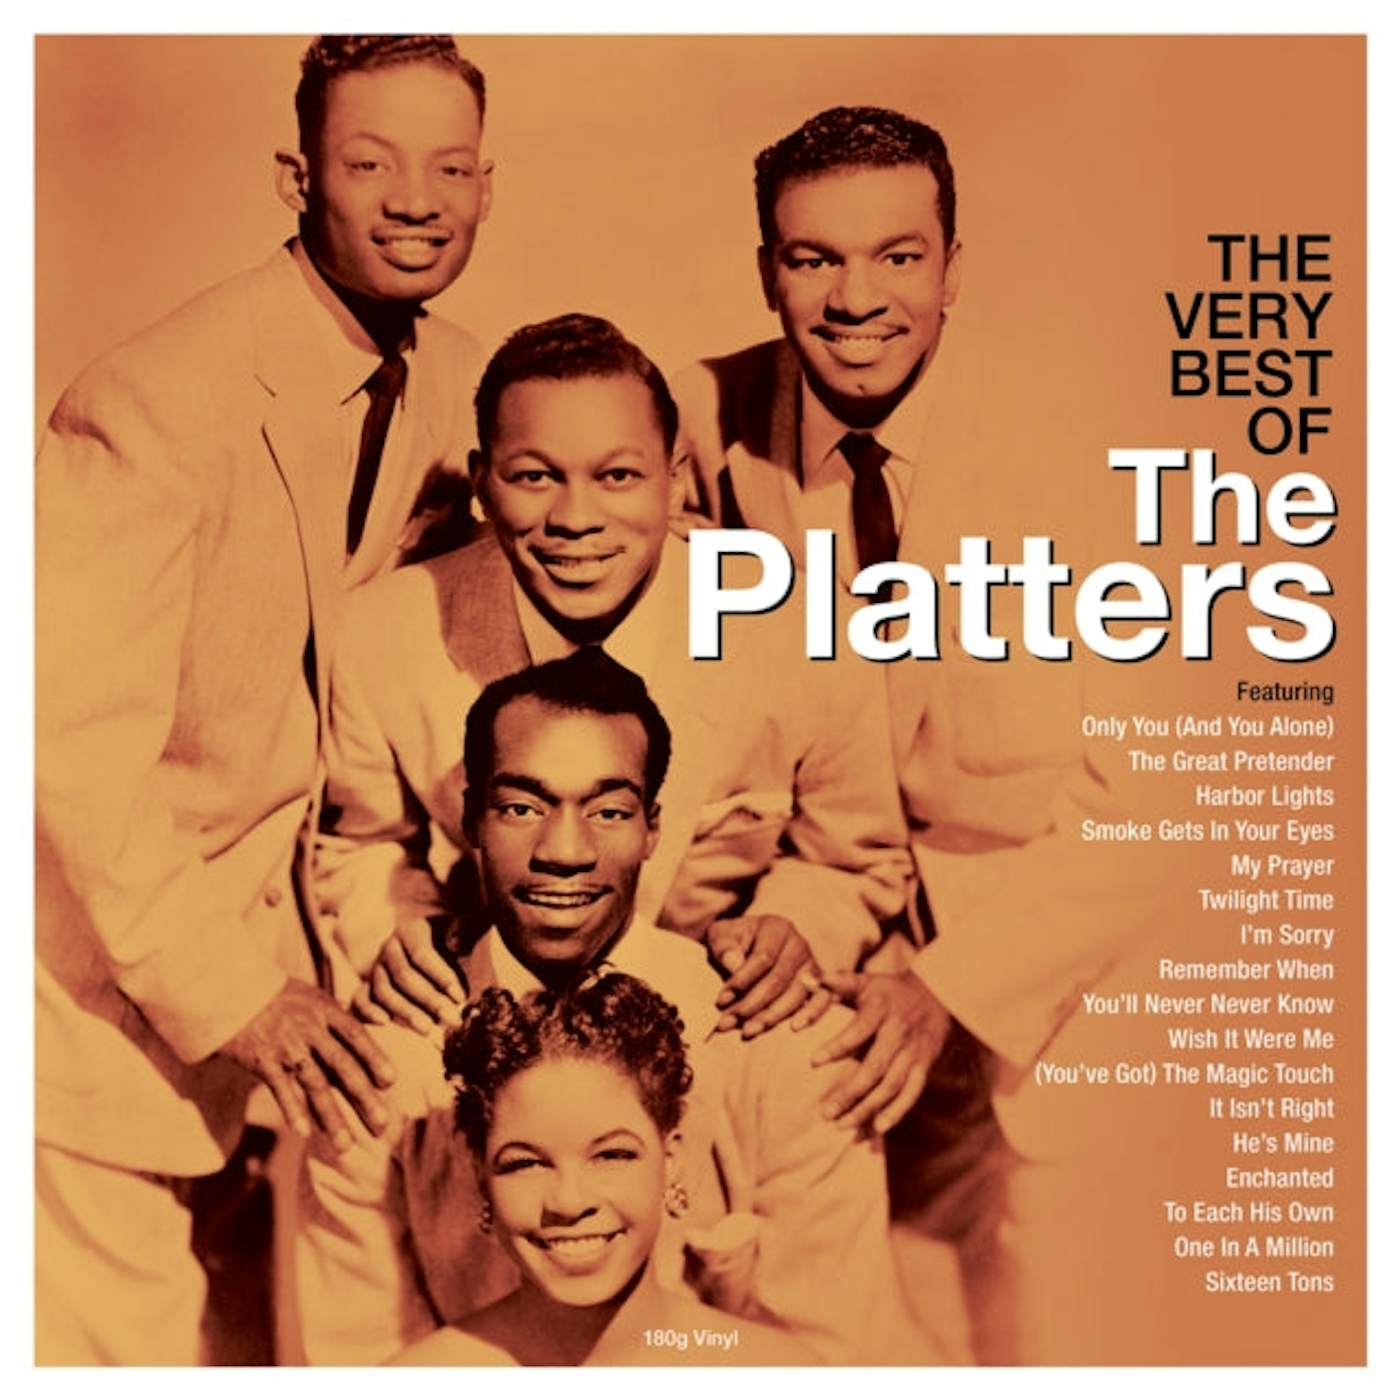 The Platters LP Vinyl Record  The Very Best Of